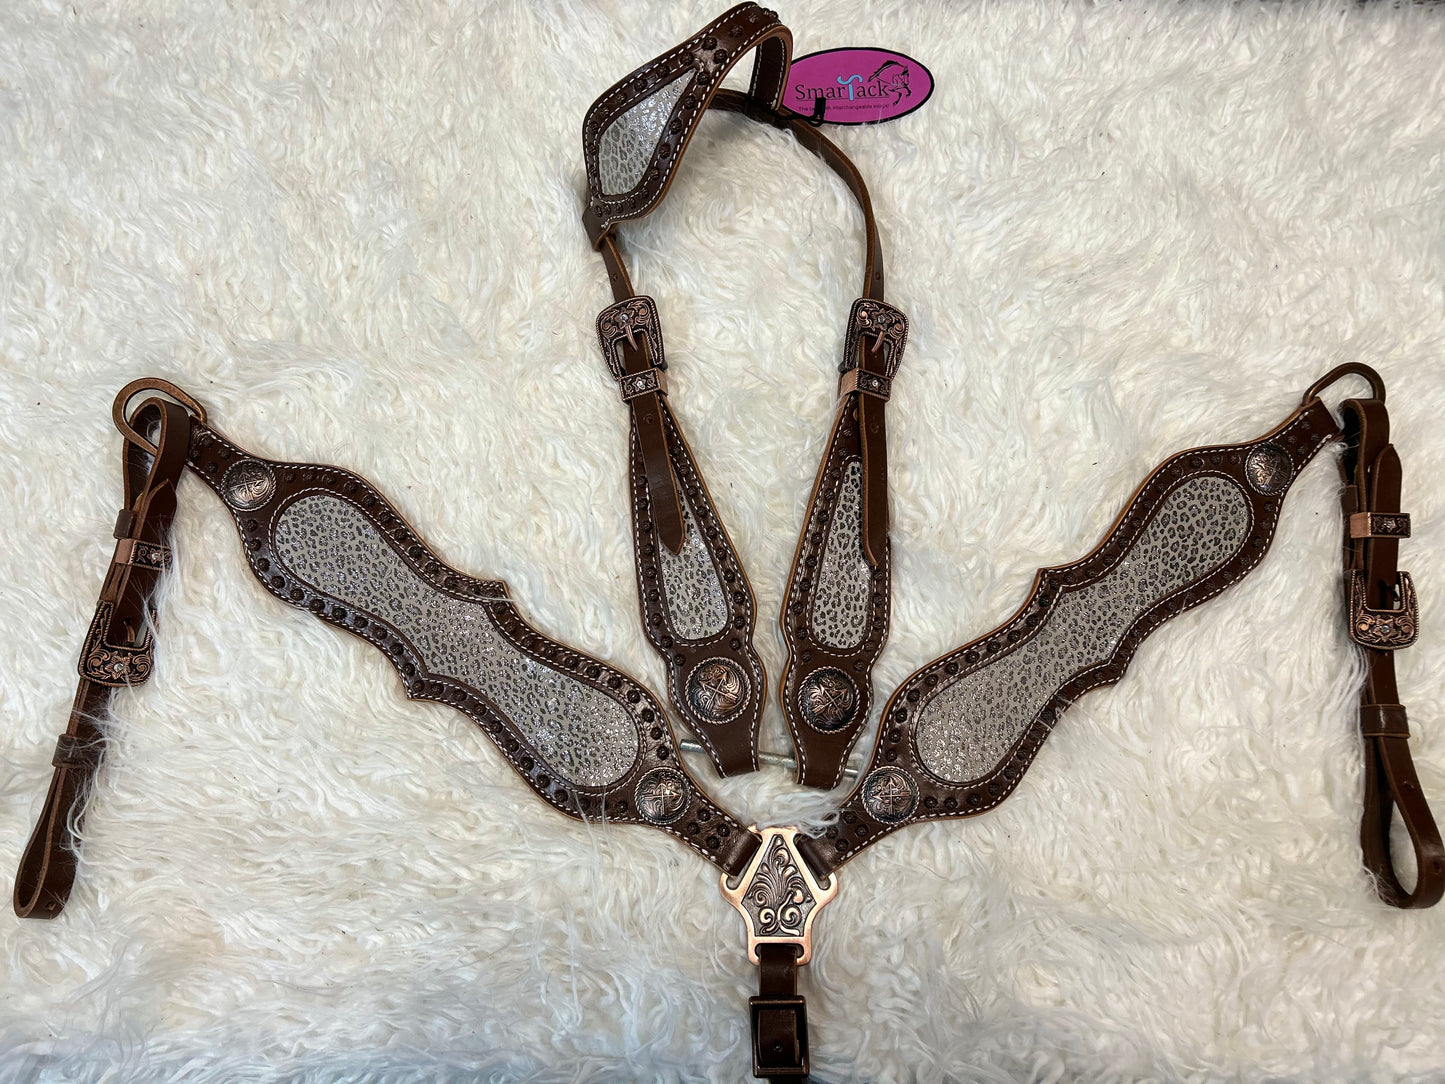 SmarTack Gen 2 "La Reina" - Complete Set Inlays (Breast Collar, Wither Strap, and One Ear Headstall)